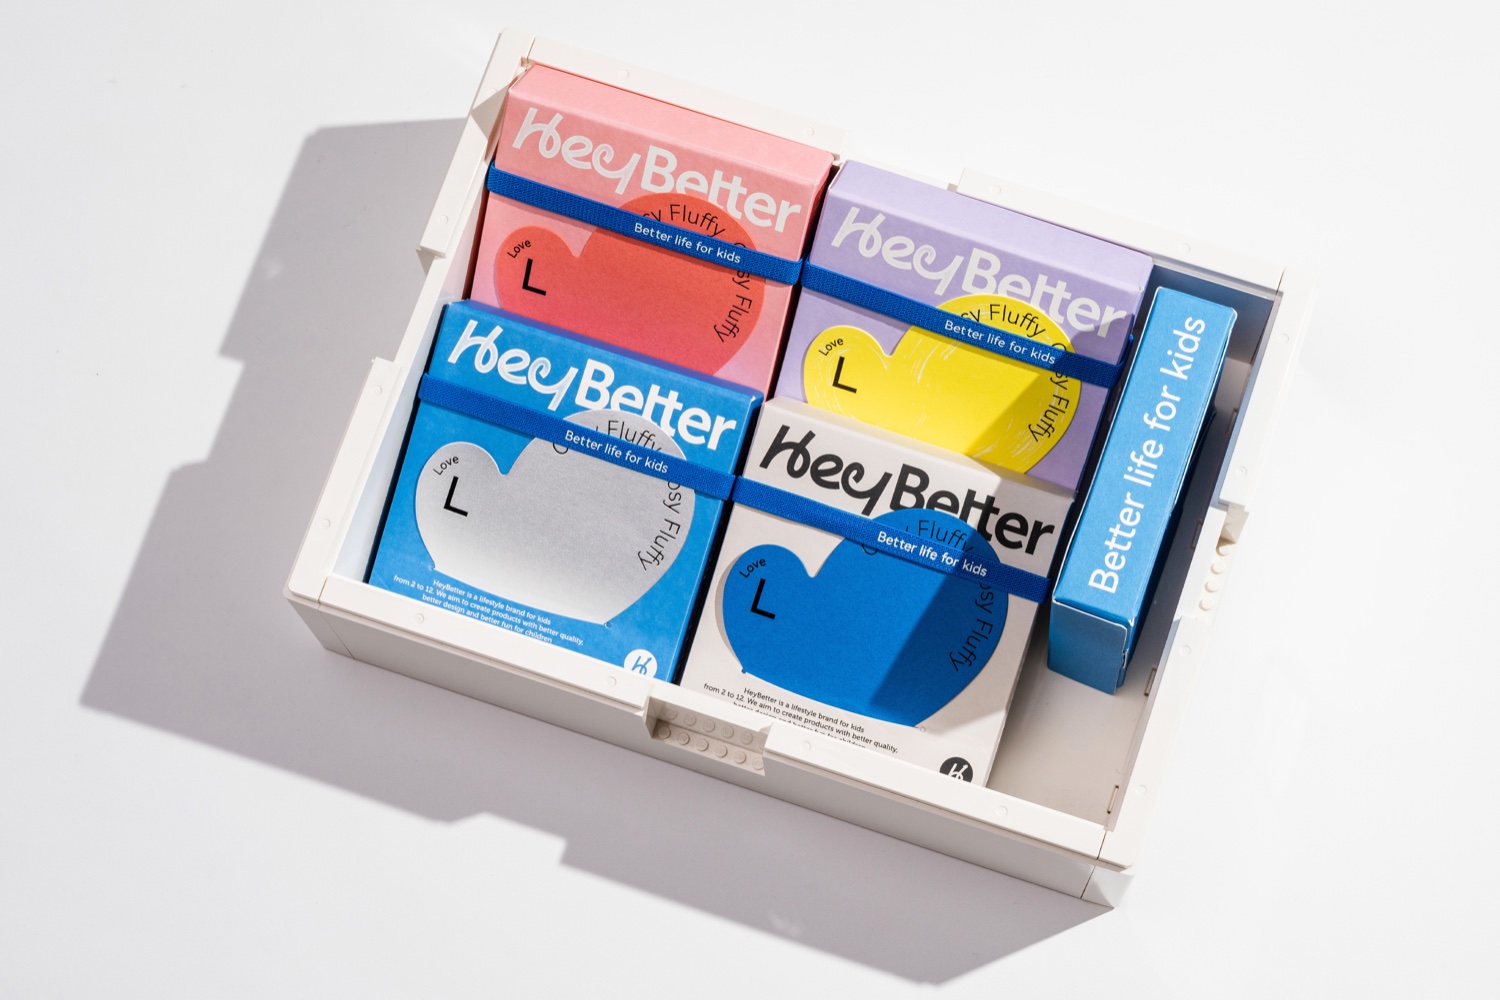 HeyBetter’s Quirky Packaging System Is Wonderfully Relatable To Both Kids And Their Purchasing Parents